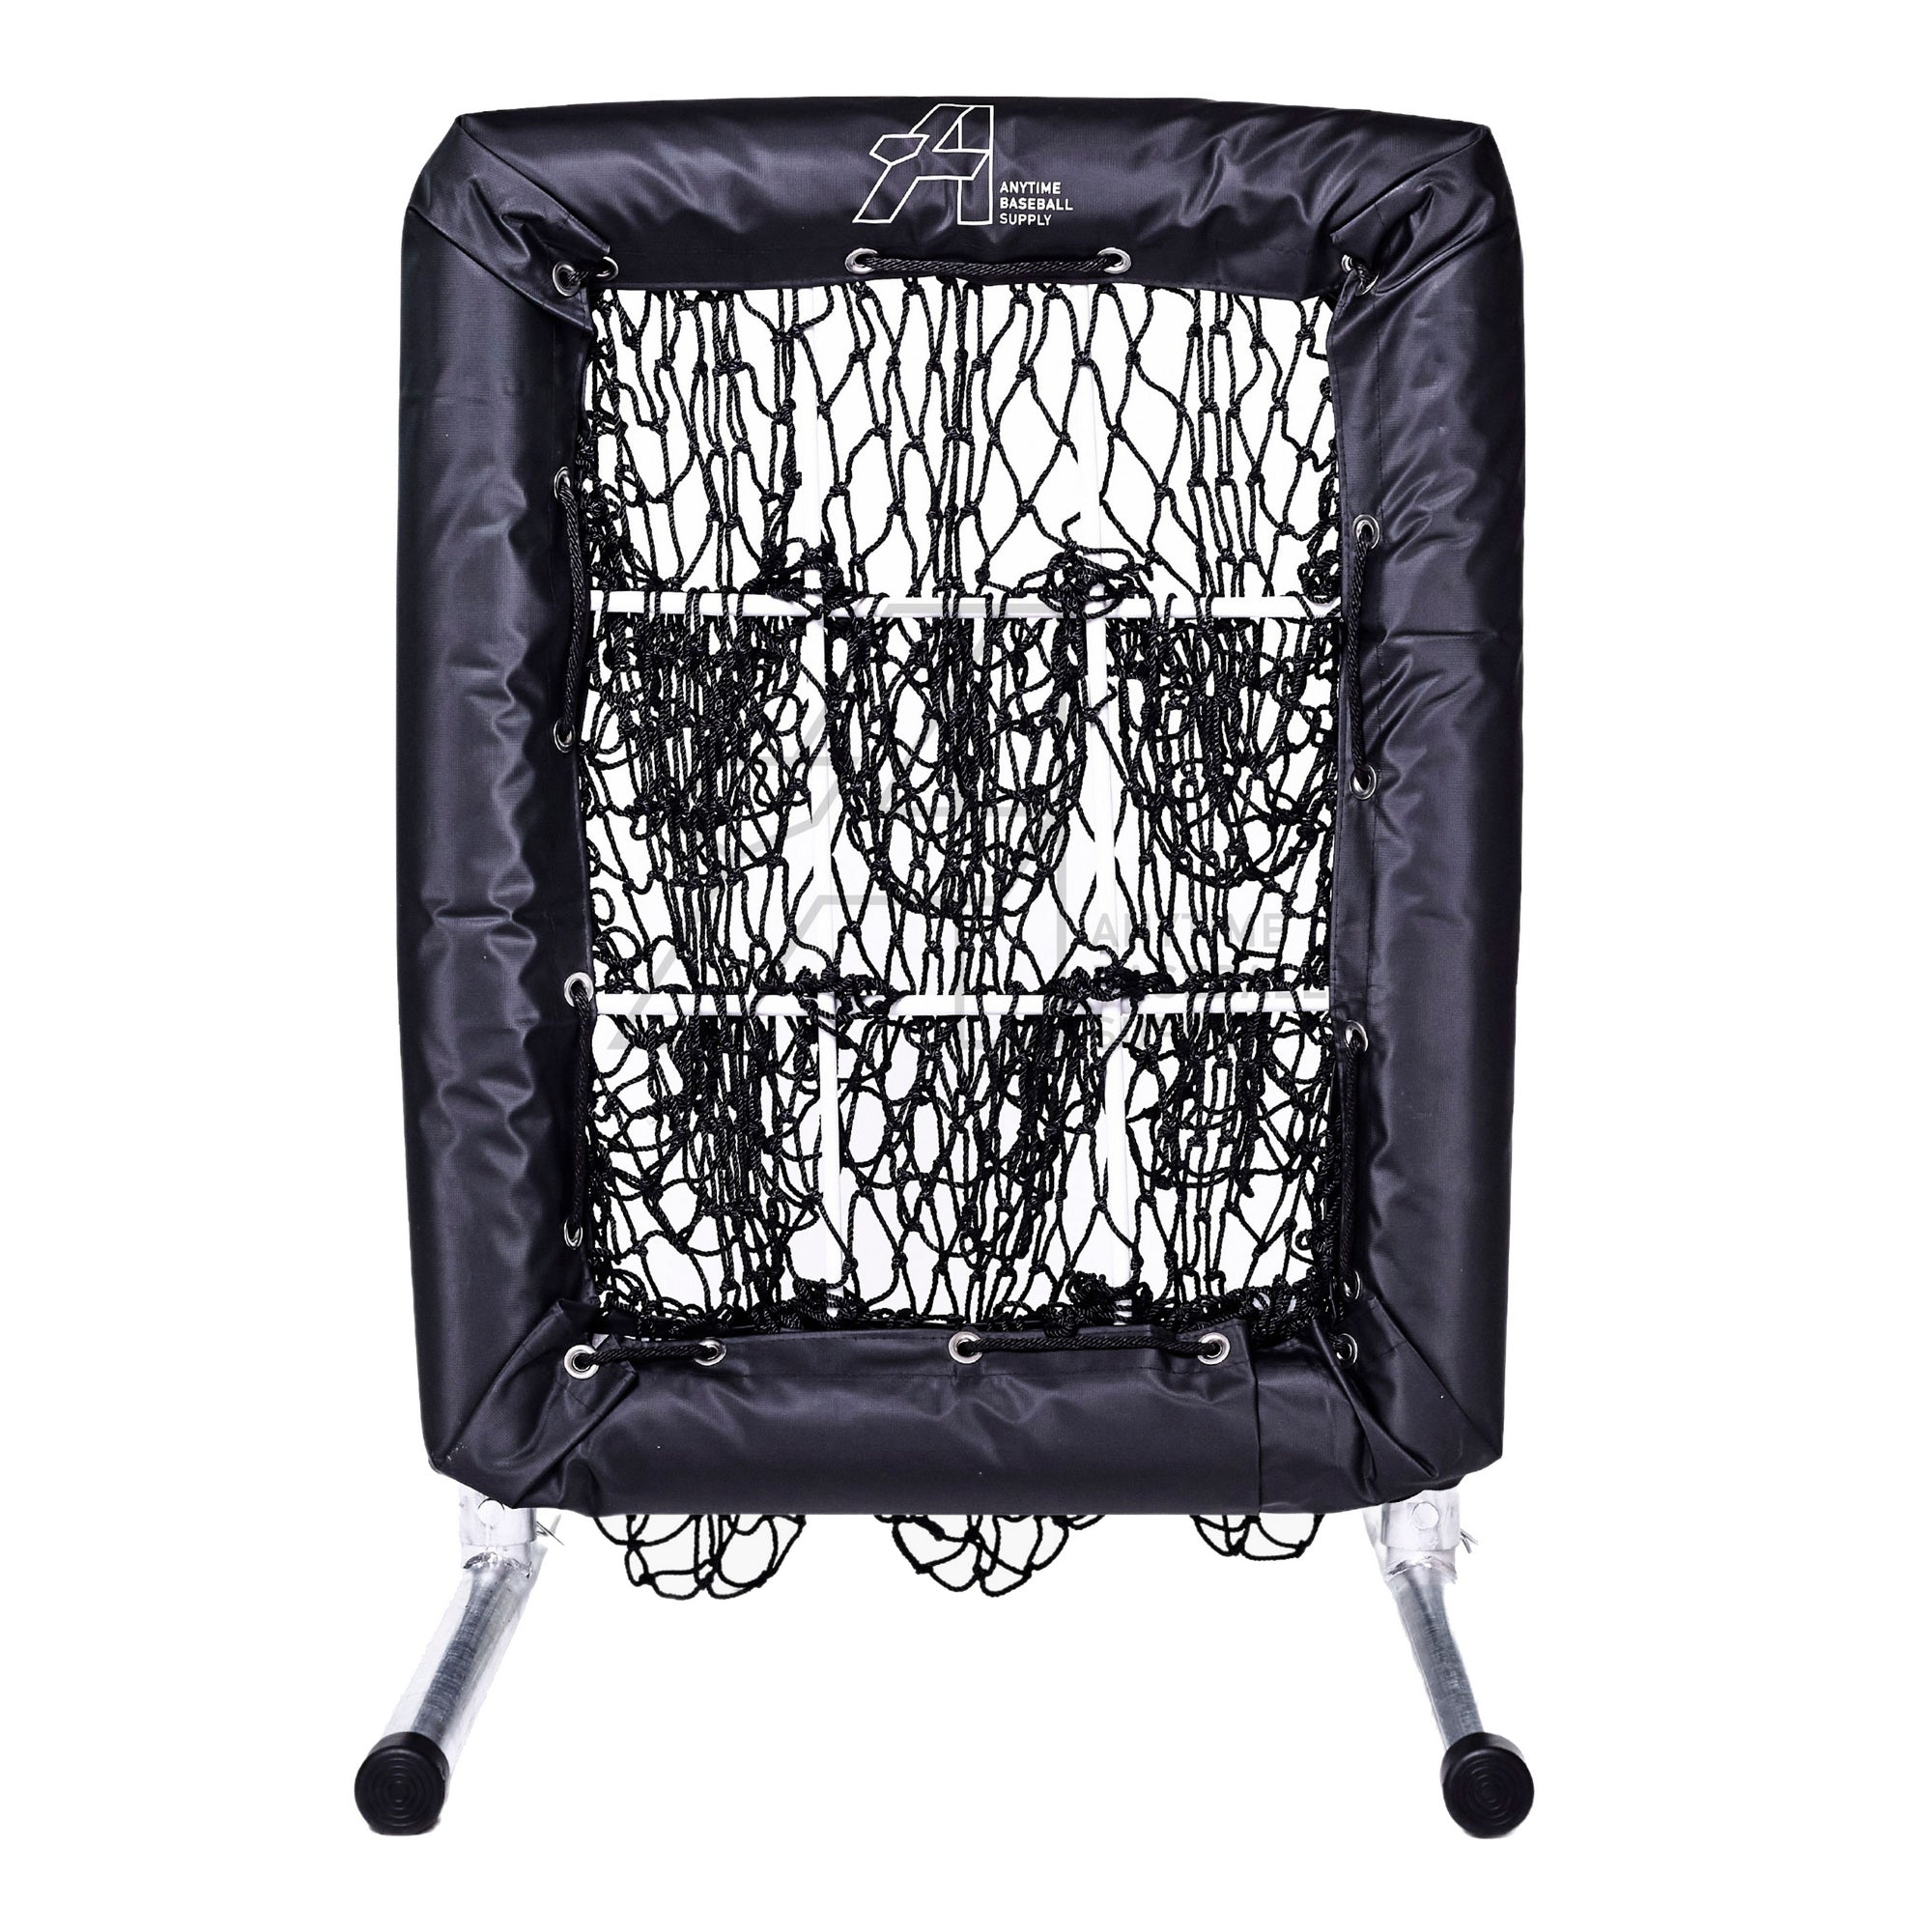 No Hitter Net 9 Hole Pitching Net Black Front View